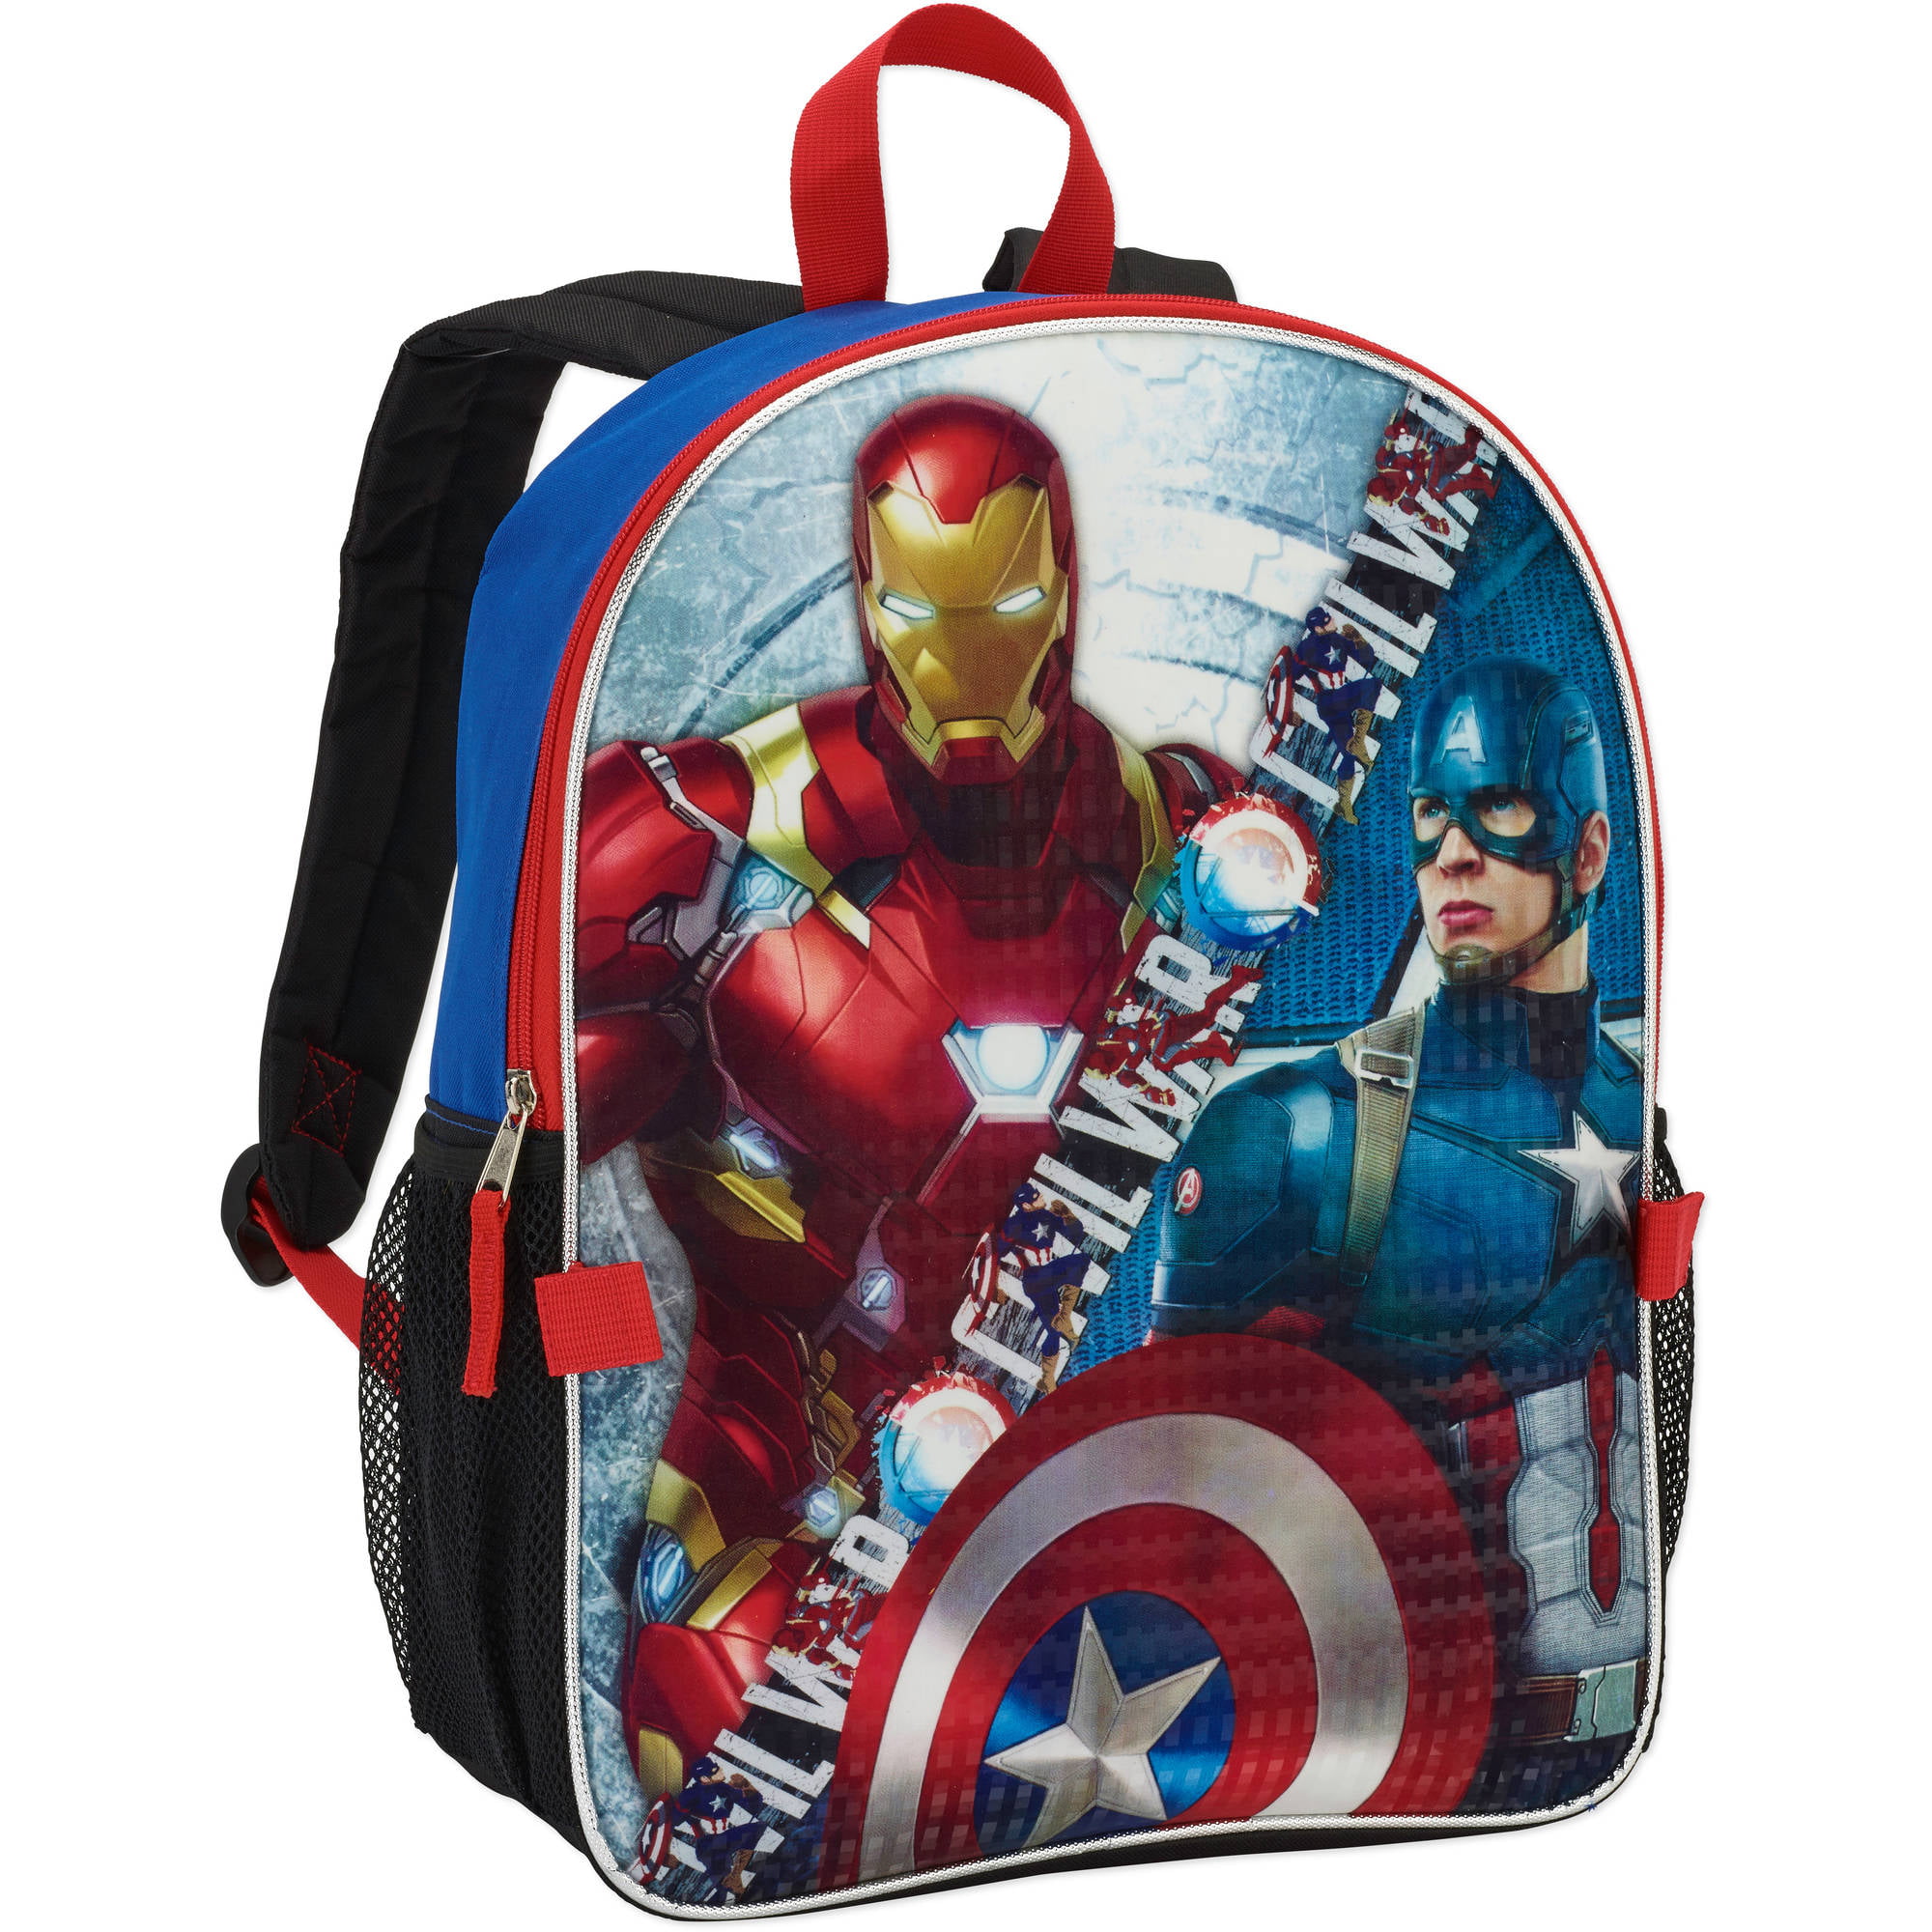 CAPTAIN AMERICA CIVIL WAR 16" Full-Size Backpack w/ Optional Insulated Lunch Box 